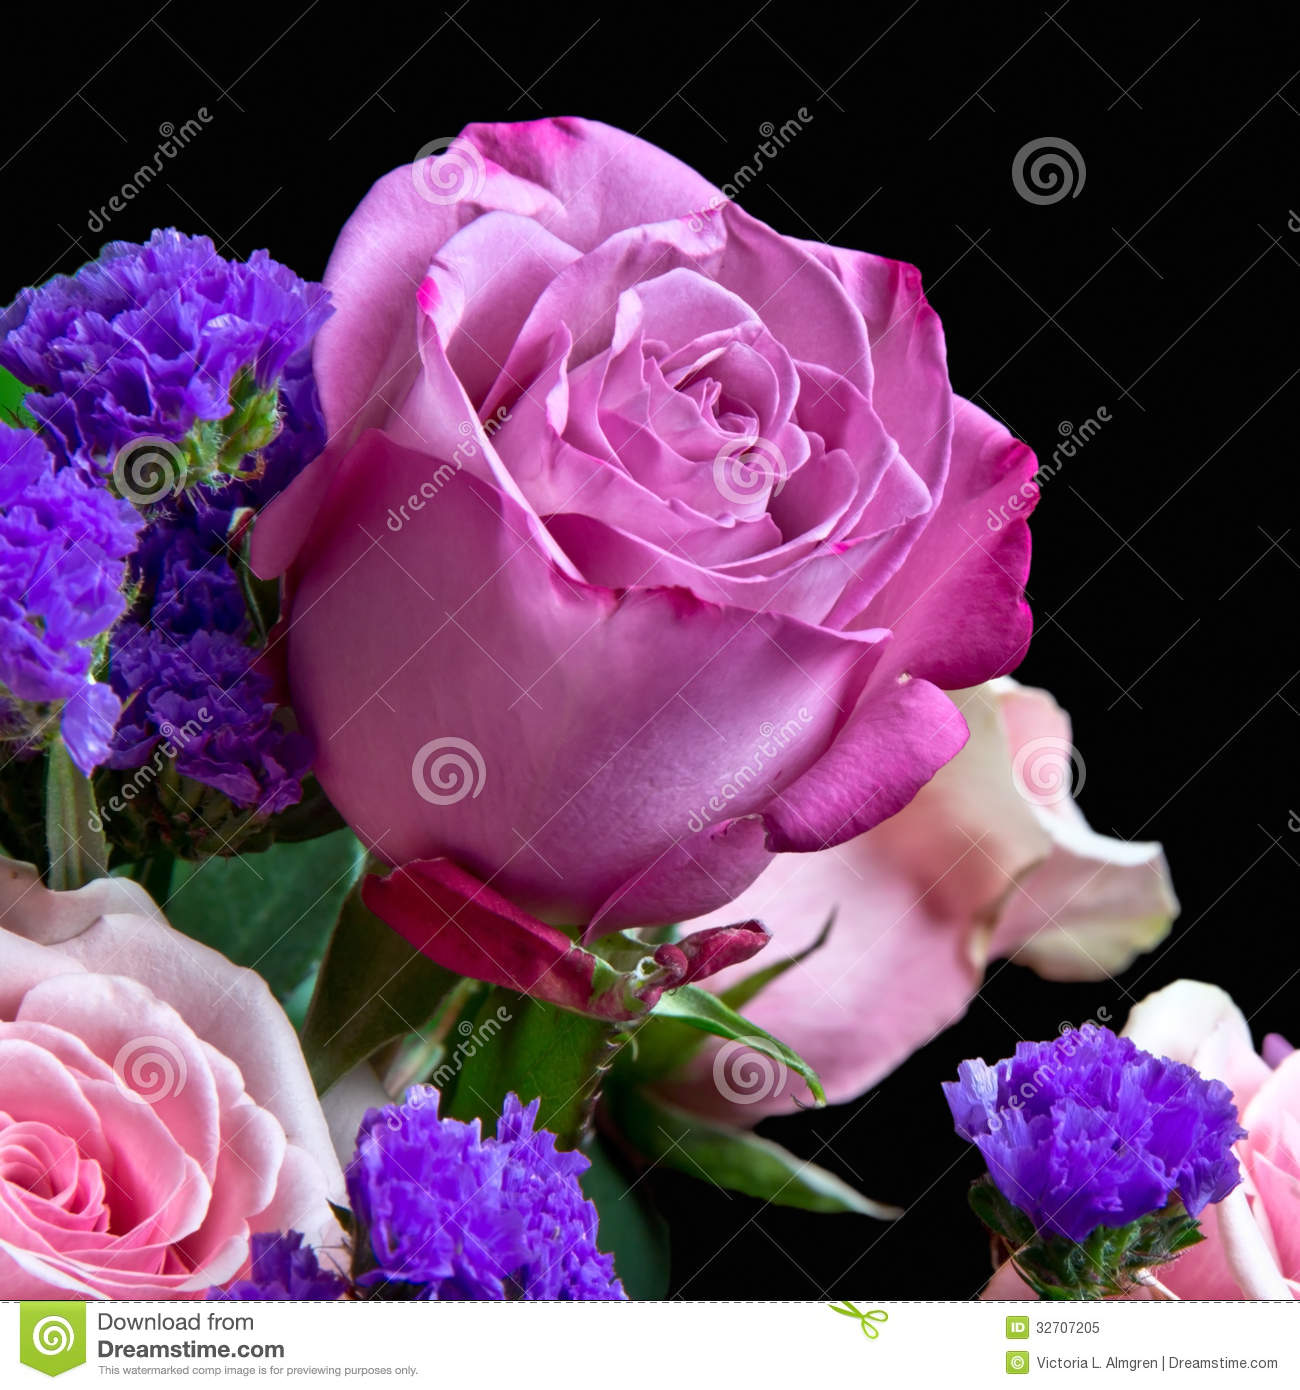 View Of A Bouquet Of Roses And Purple Statice With Focus On One Pink    